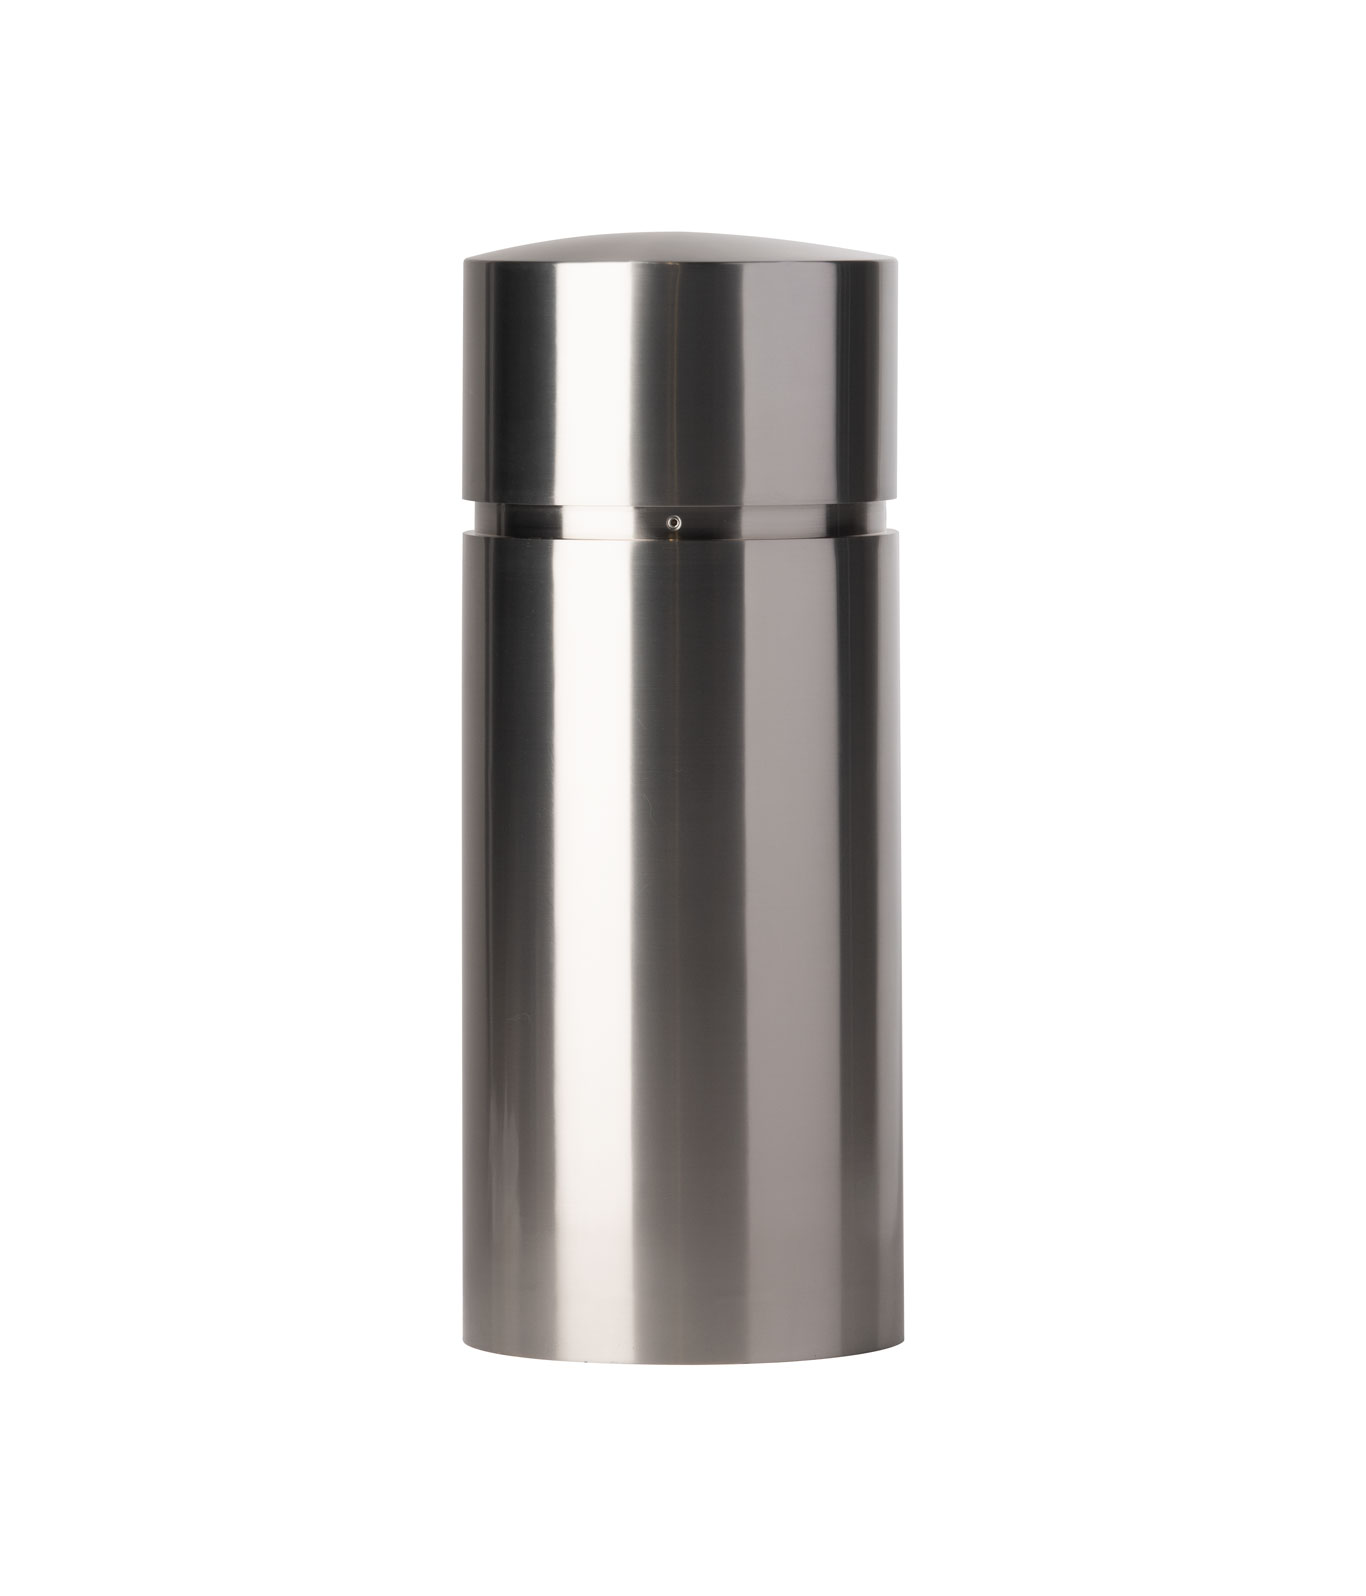 R-7341 stainless steel bollard cover with rounded top